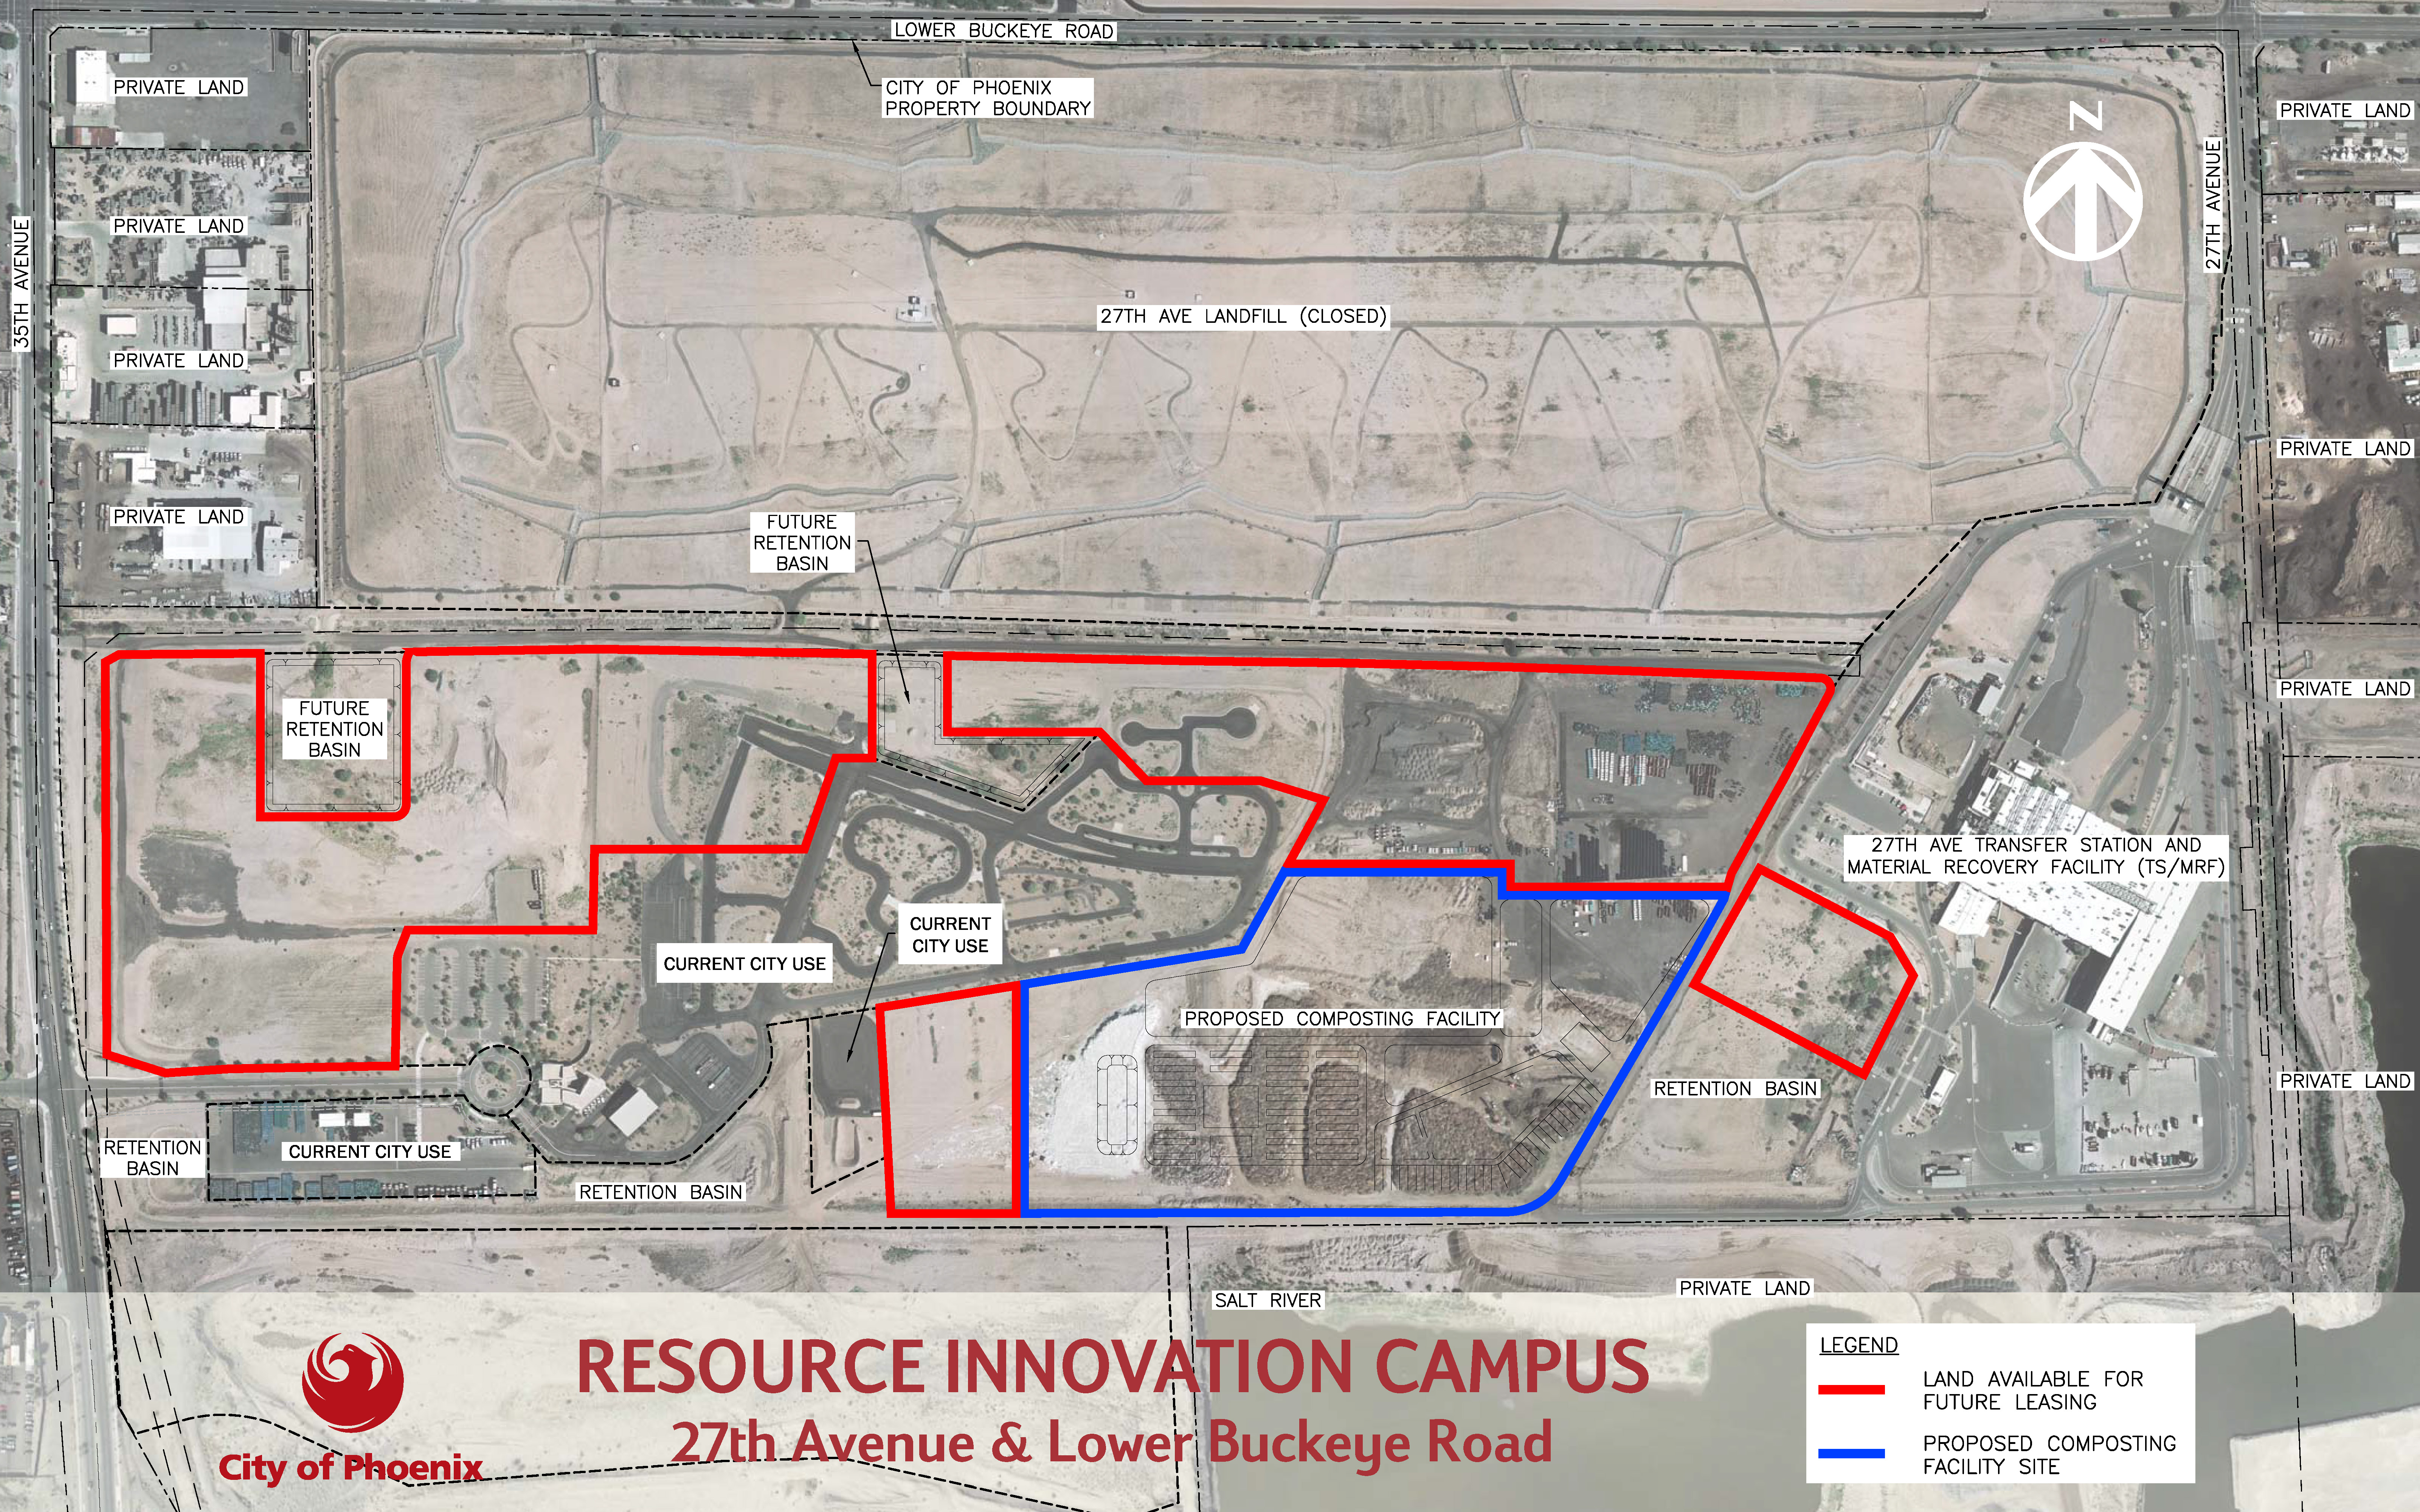 Map of the Resource Innovation Campus